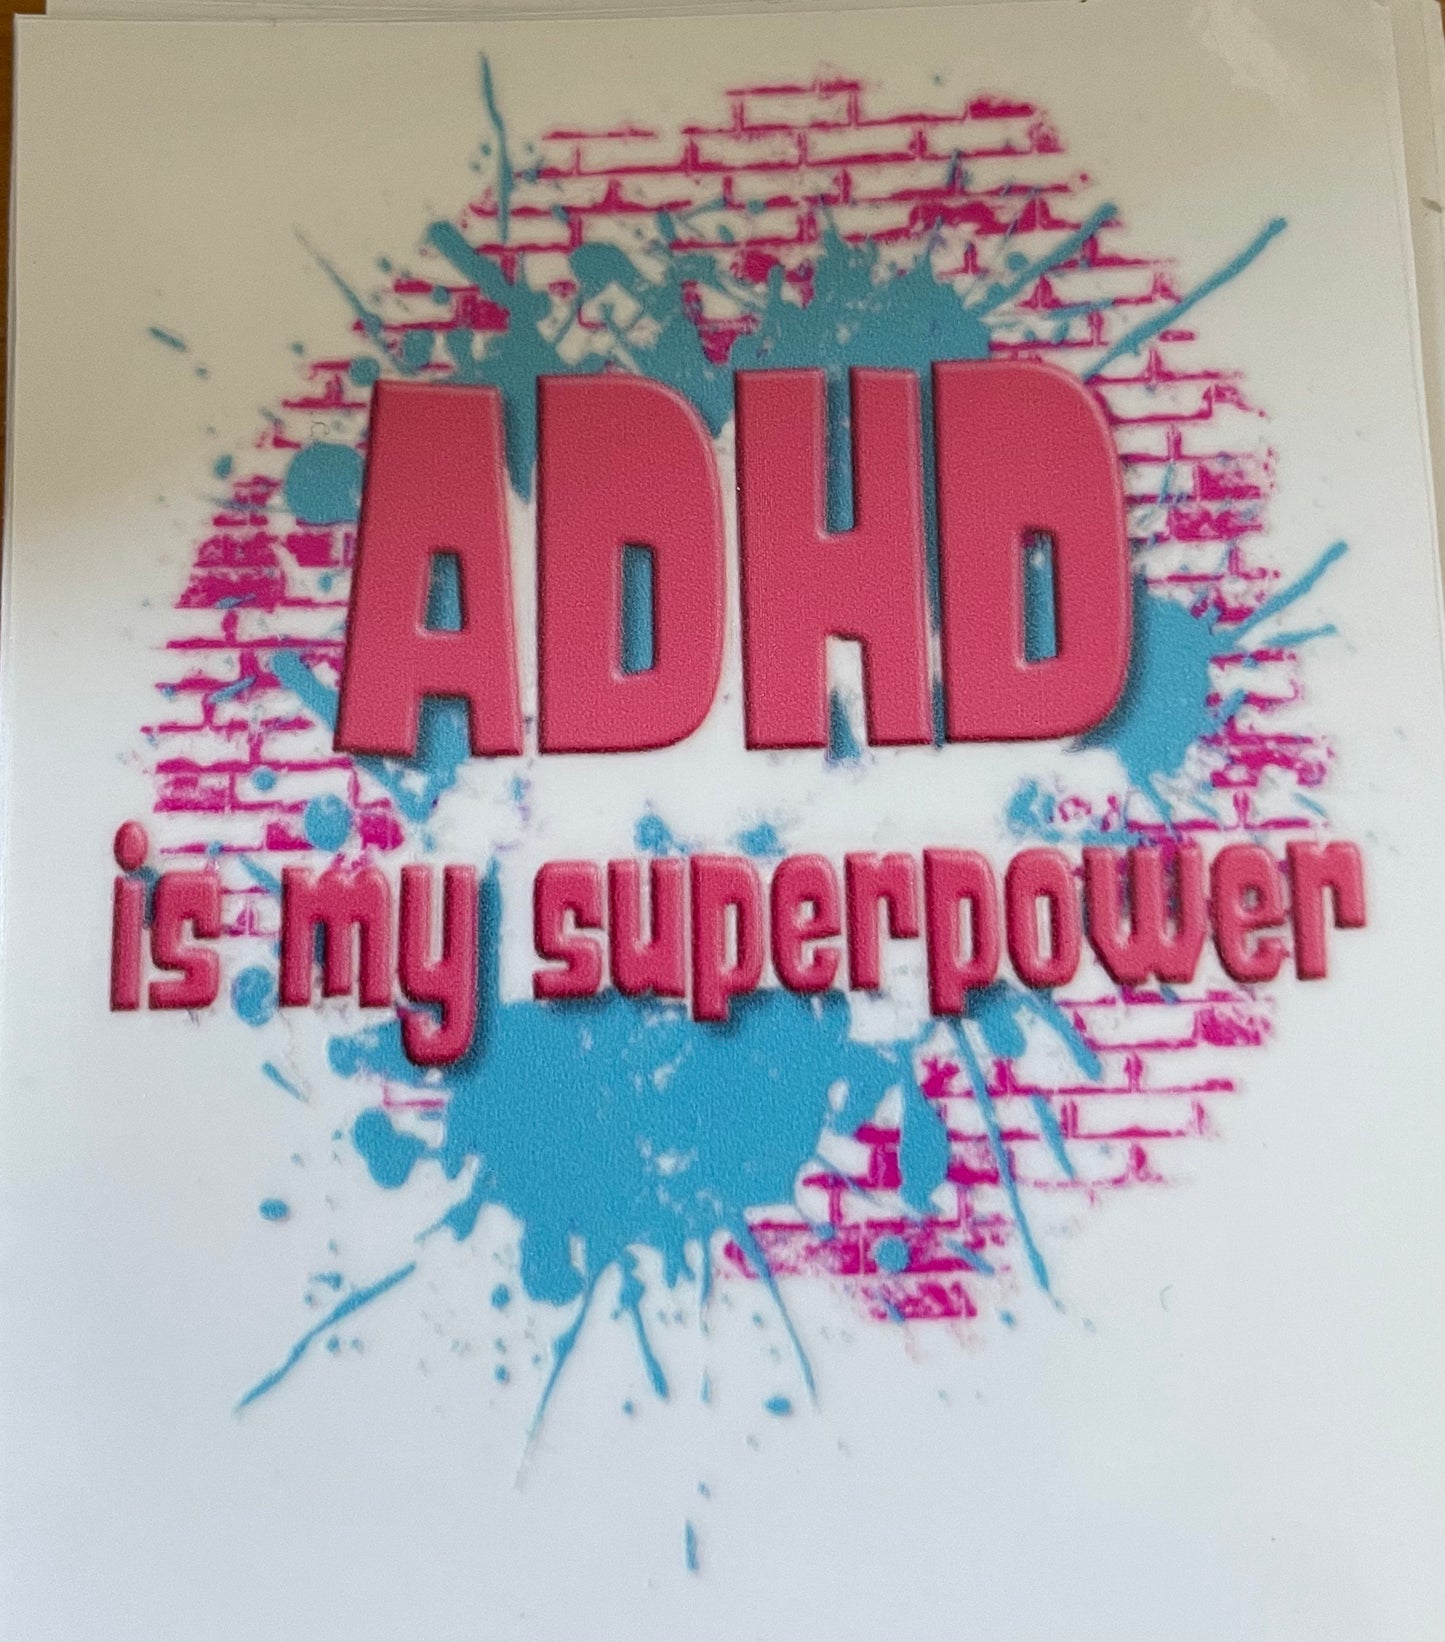 Adhd superpower UVdtf Decal